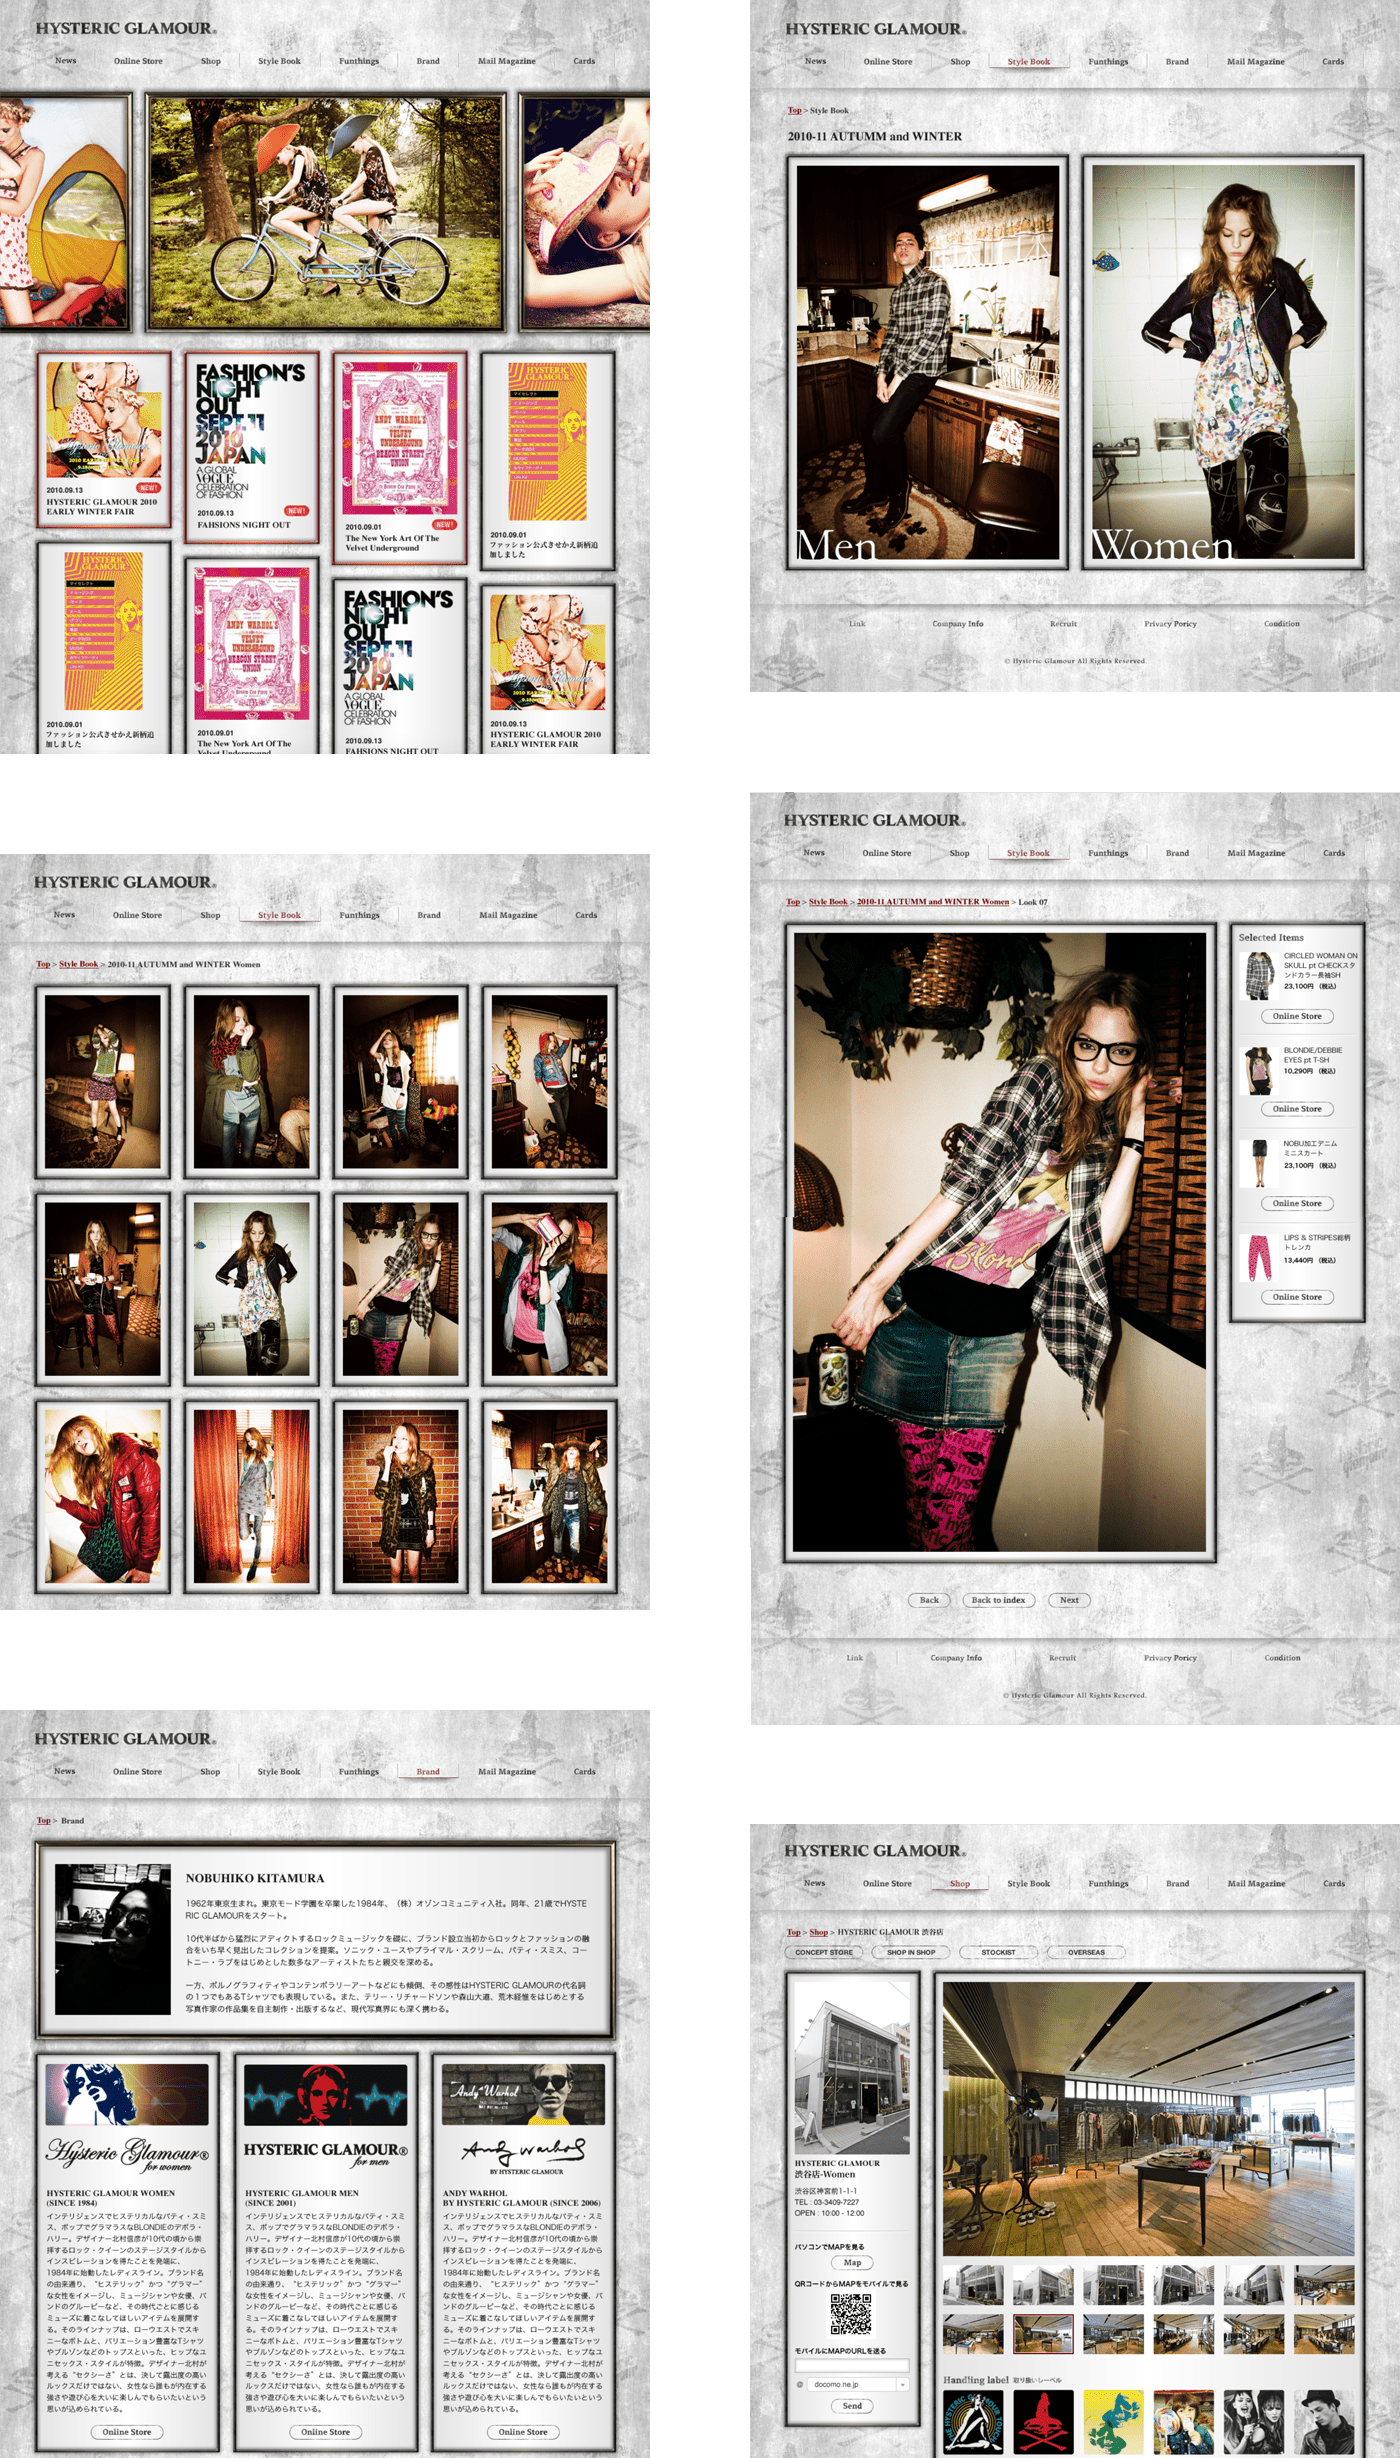 HYSTERIC GLAMOUR Official Site Design